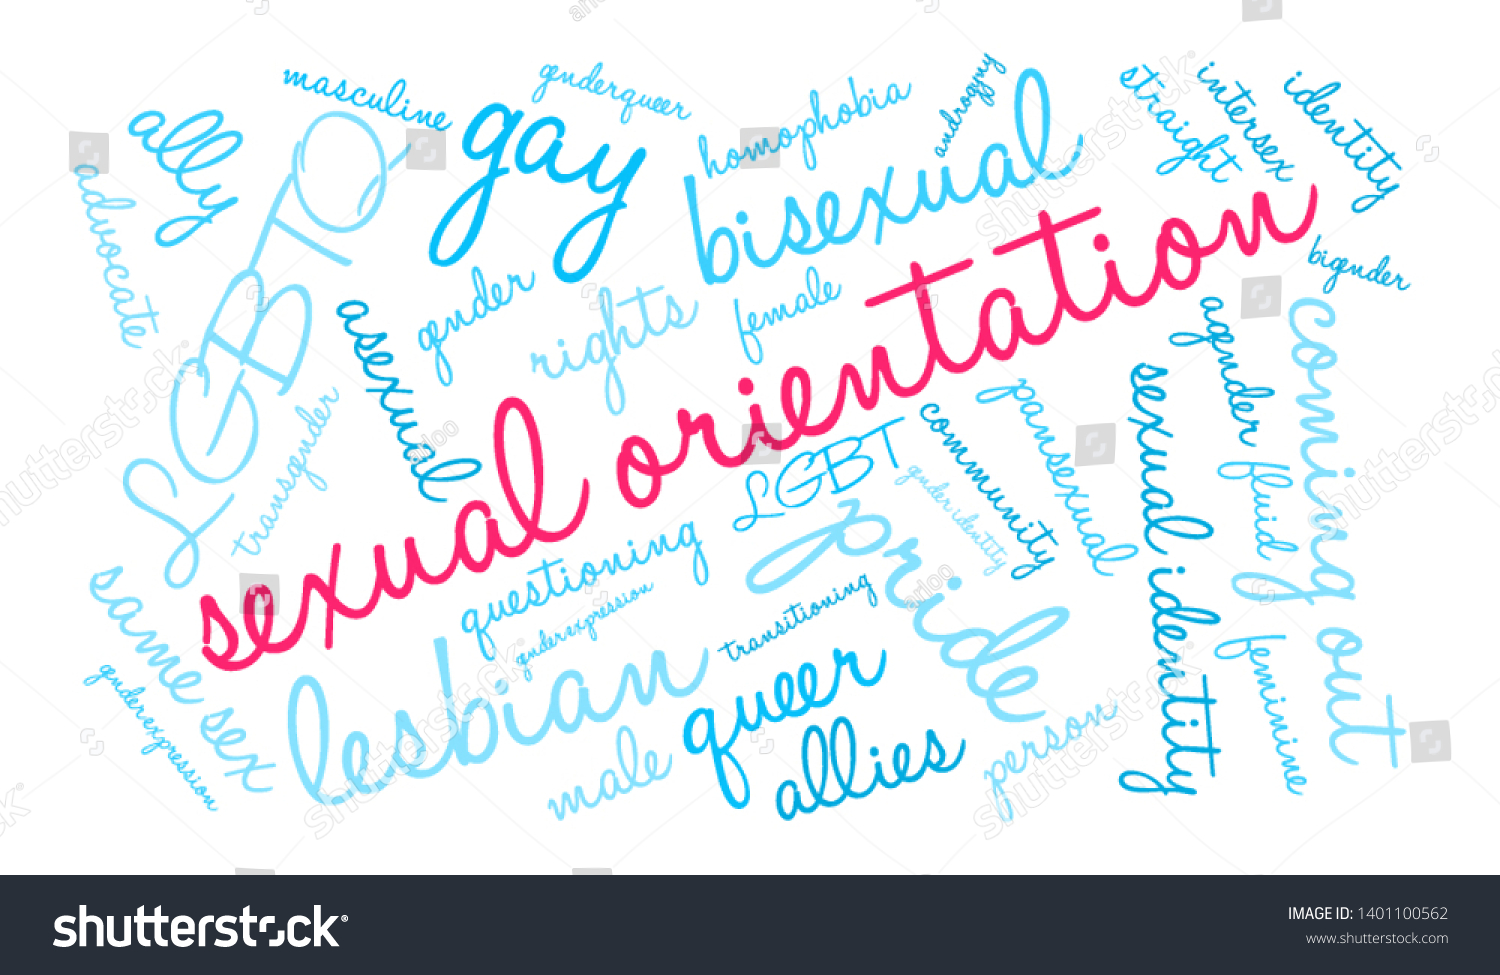 Sexual Orientation Word Cloud On White Stock Vector Royalty Free 1401100562 Shutterstock 7860